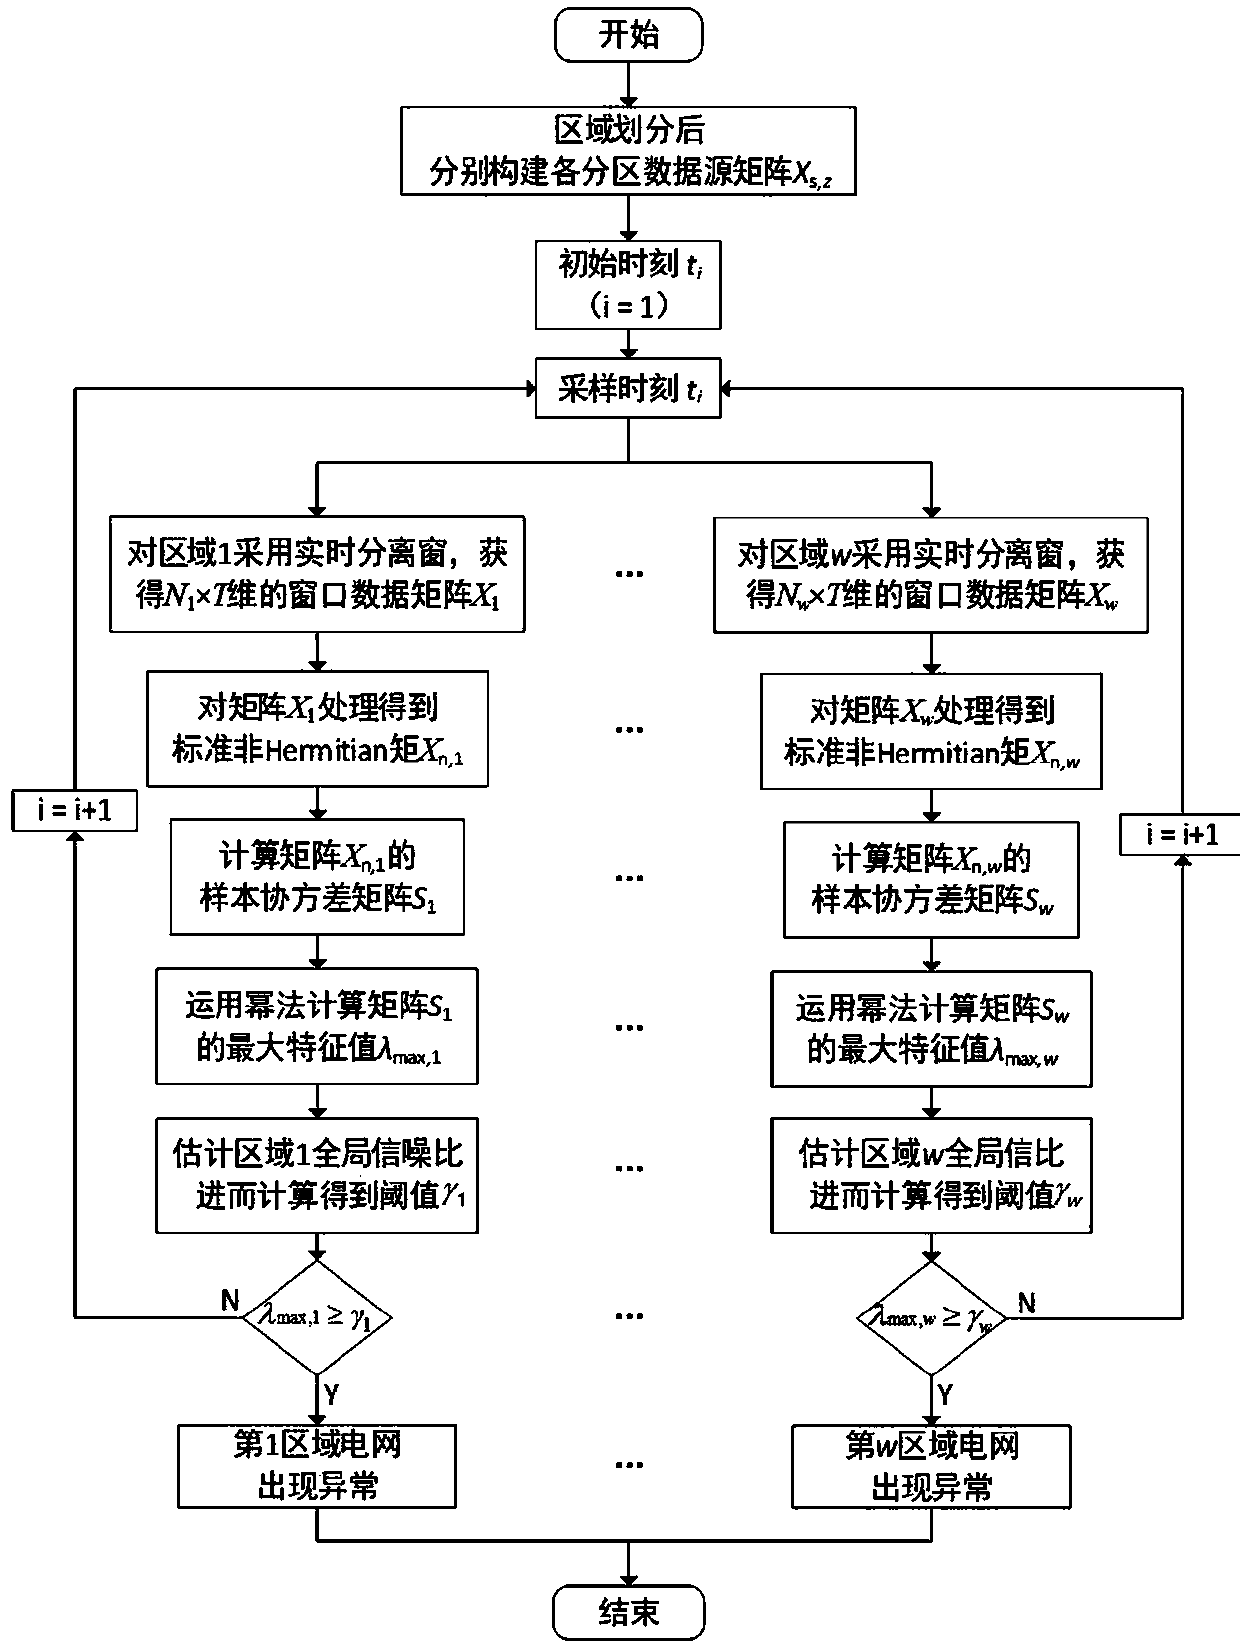 Large-scale power grid abnormal load identification method based on a power method and a parallel computing technology